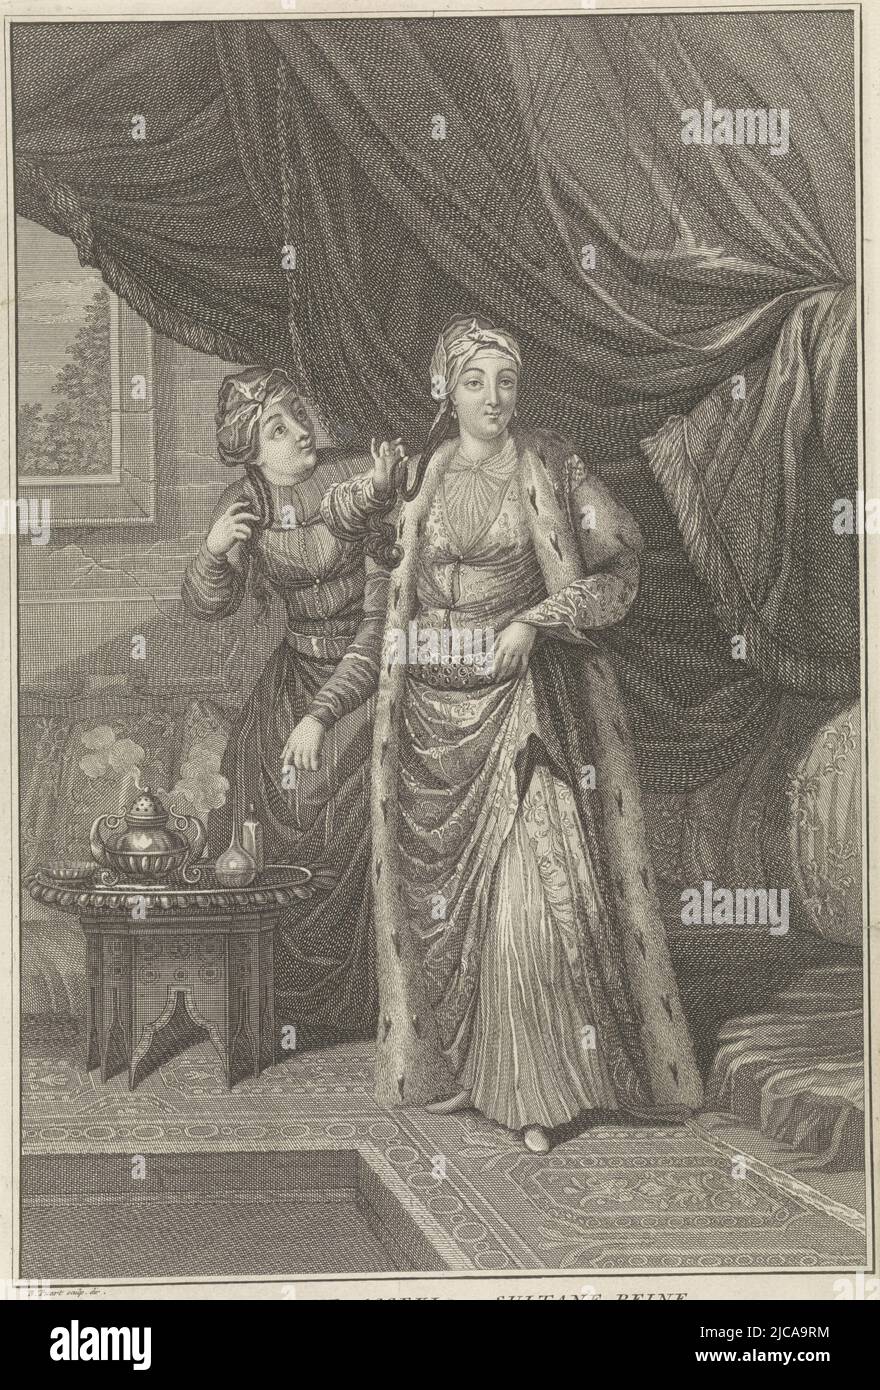 A Turkish woman and her maid, in traditional dress The room they are in is lined with carpets The maid points the woman to a table on which is a traditional teapot, Portrait of a Turkish Woman La Sultane Asseki, ou Sultane Reine , print maker: Bernard Picart, (mentioned on object), Bernard Picart, (mentioned on object), Gérard Jean Baptiste Scotin (I), (possibly), Paris, 1683 - 1733, paper, etching, engraving, h 325 mm × w 215 mm Stock Photo